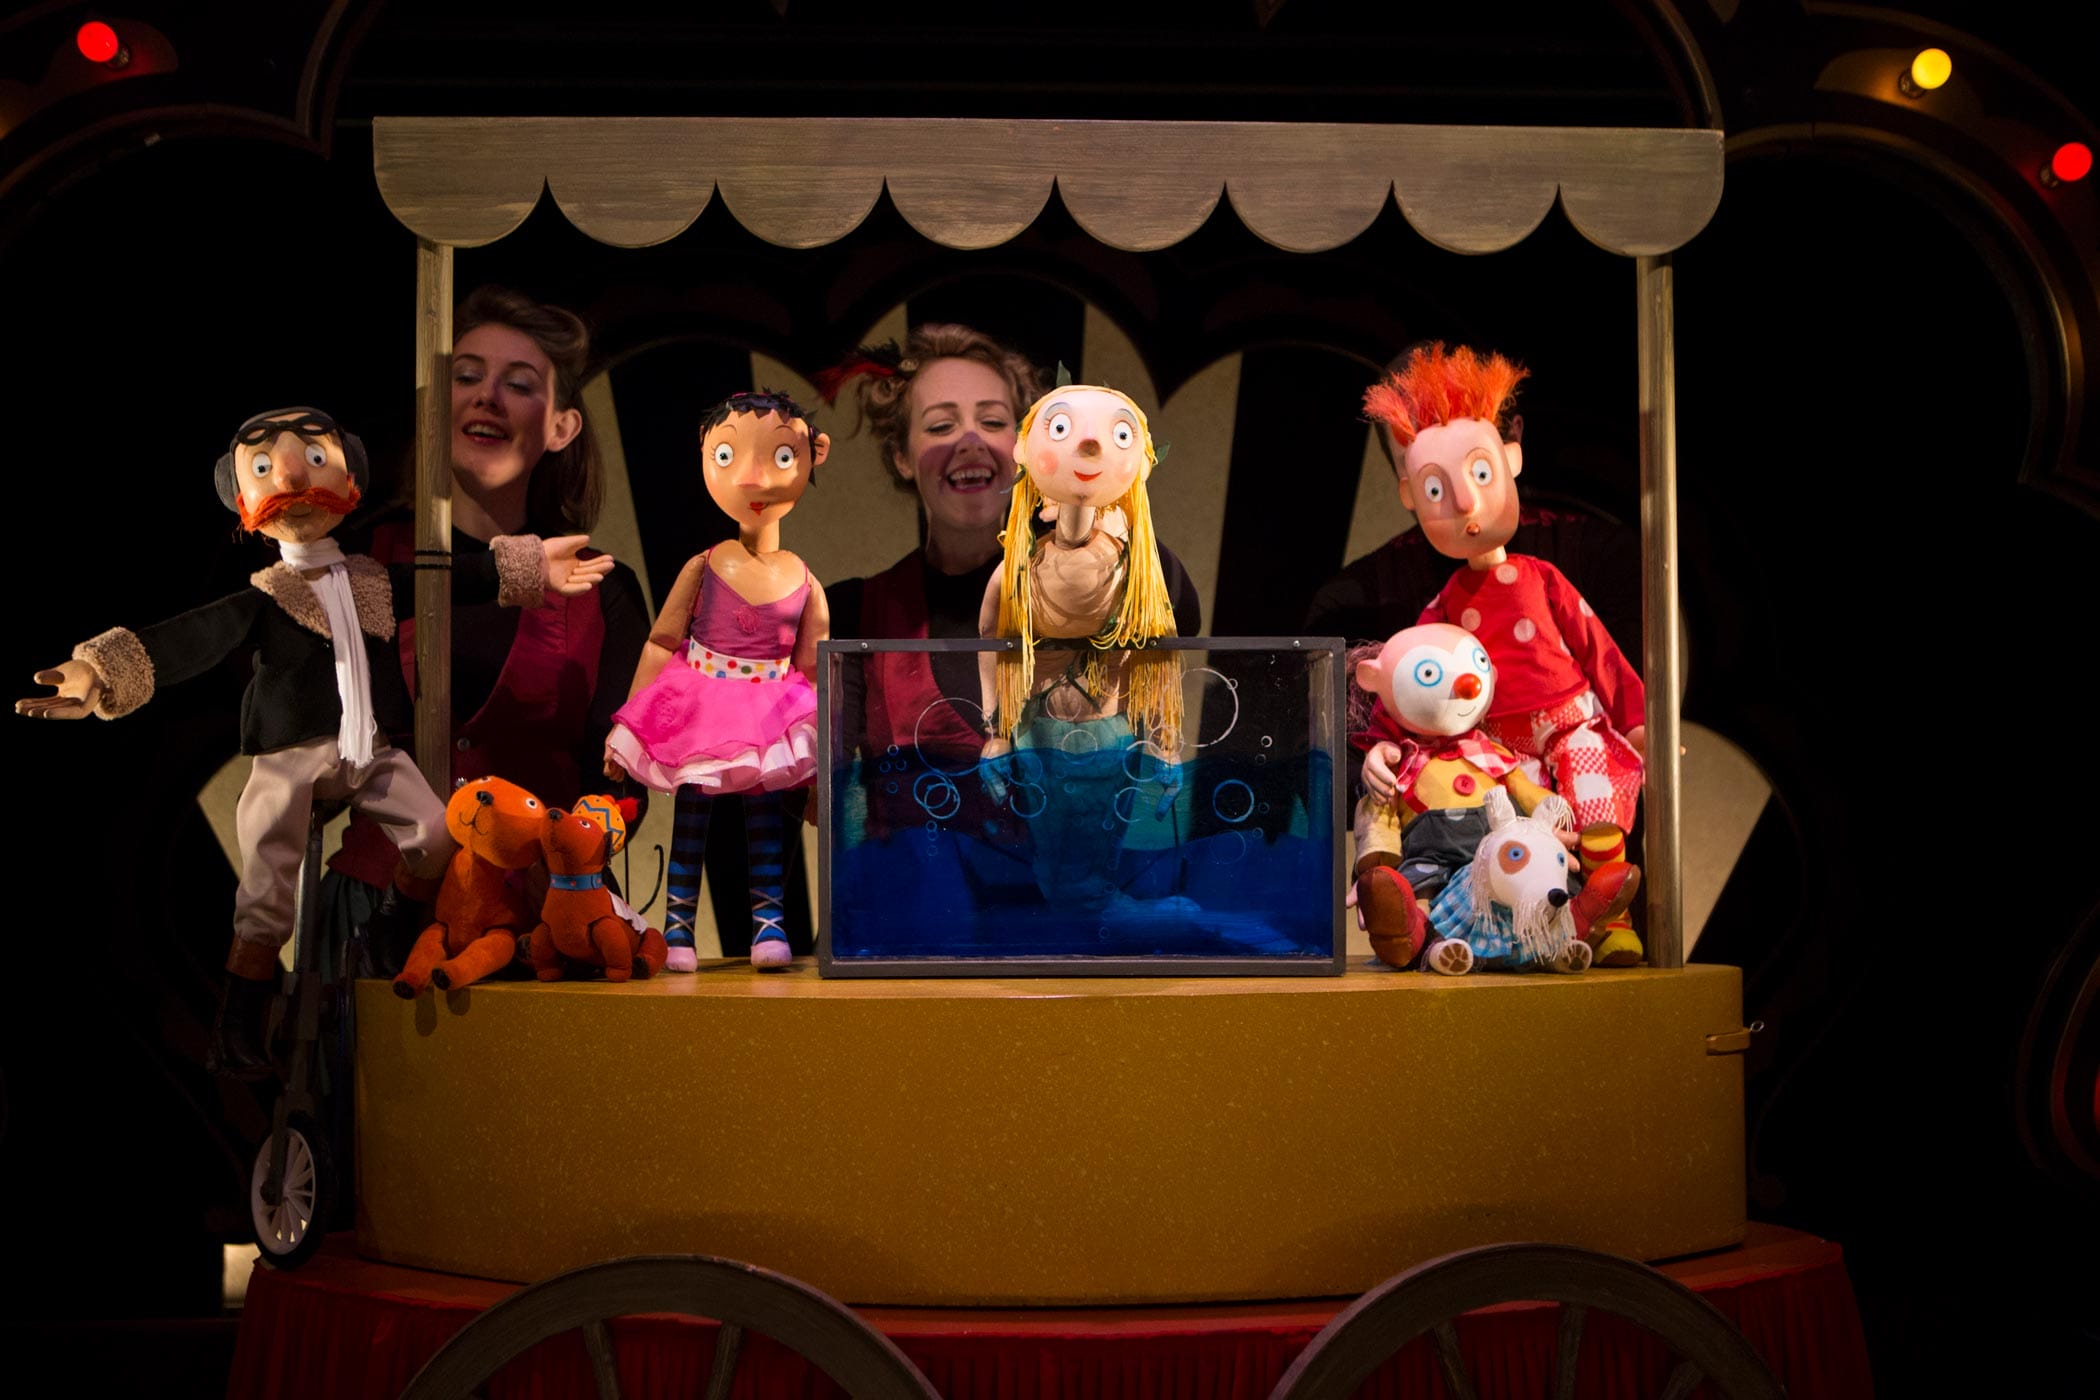 A group of circus performer puppets surround the Singing Mermaid puppet sitting happily in a tank of water. Two puppeteers can be seen in the background.